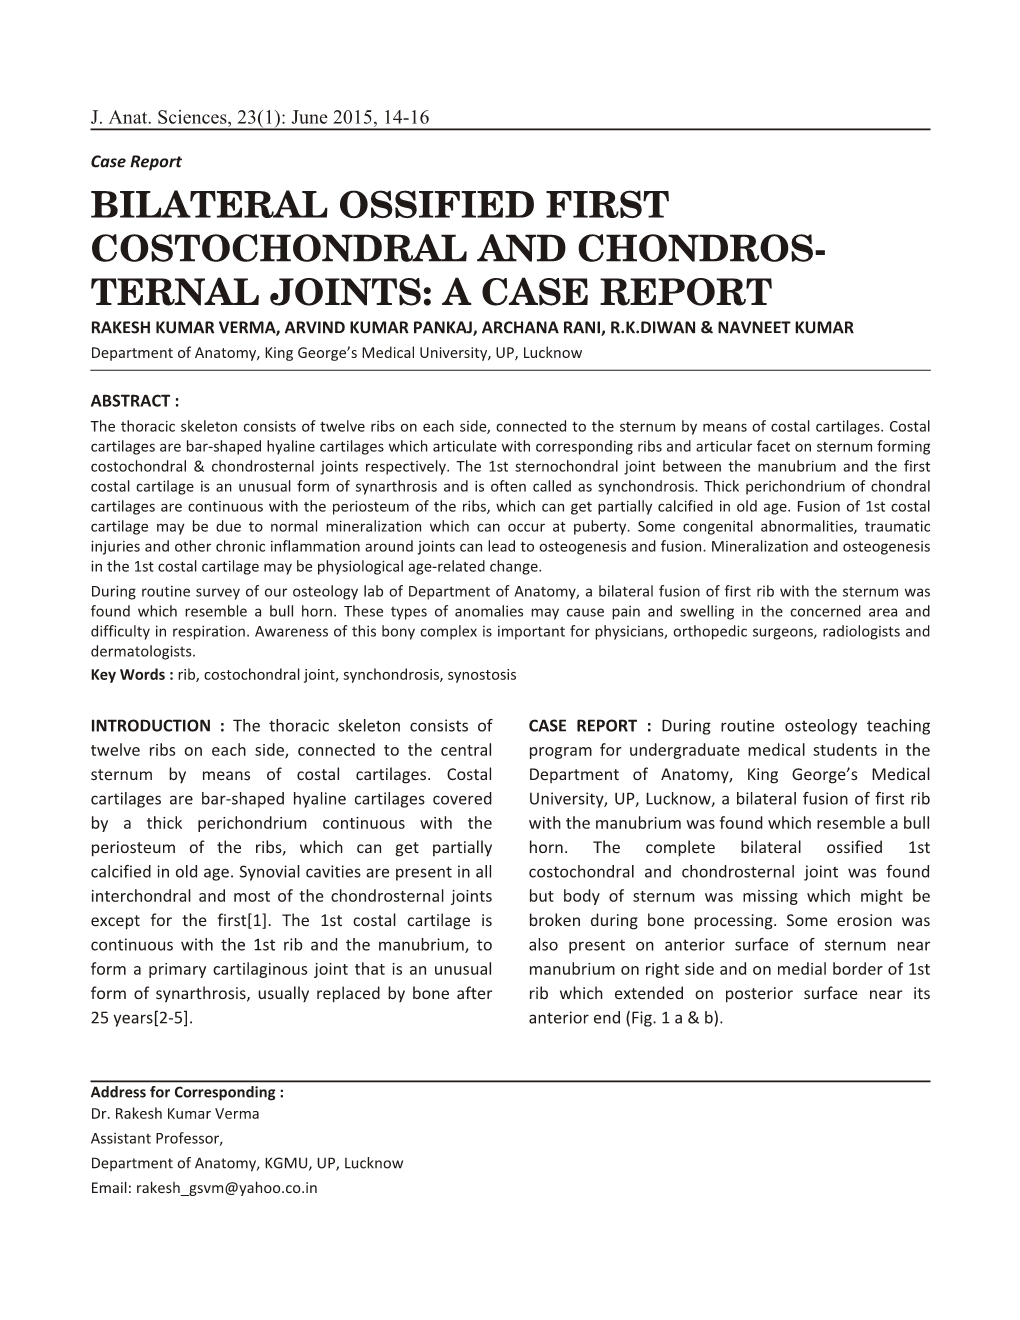 Bilateral Ossified First Costochondral and Chondros